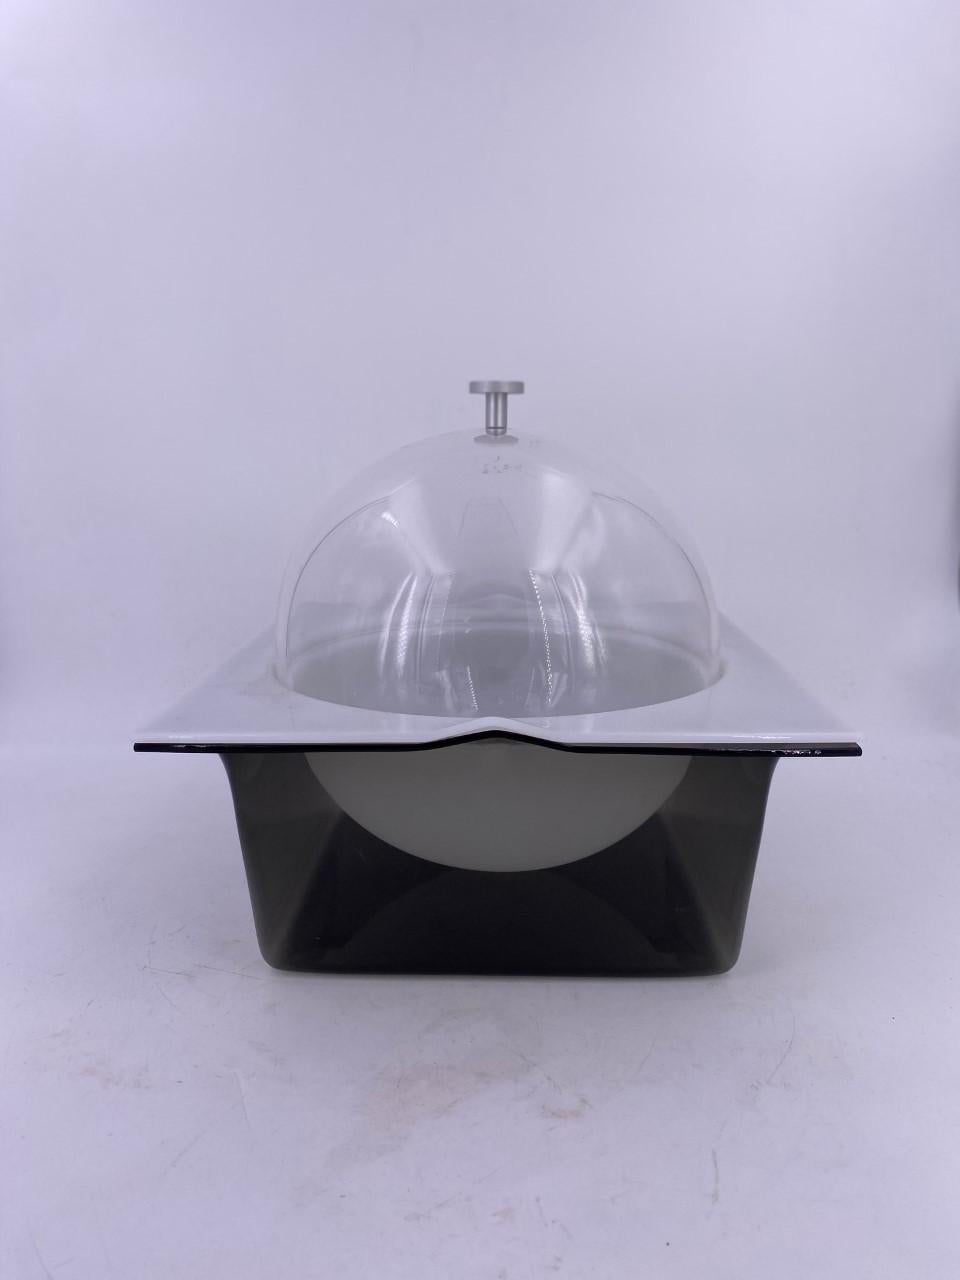 Beautiful and unique Space Age dome ice bucket, with white plastic removable insert for easy cleaning. Sleek and glamorous. Minimal in design and high in style.